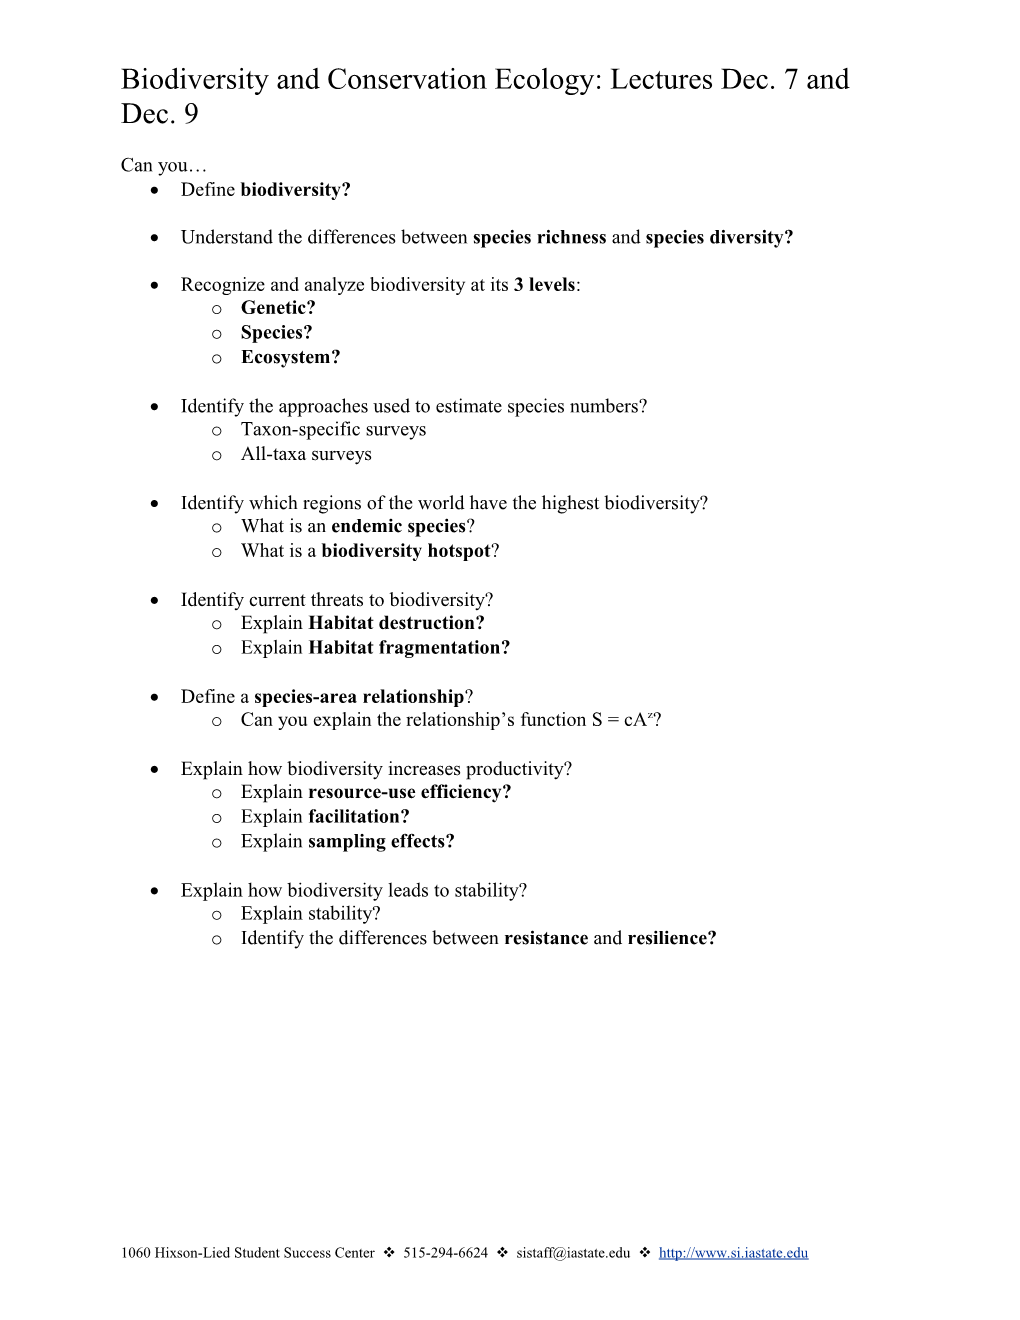 These Questions Regard the Last 4 Lectures of the Course. There Will Be More Questions